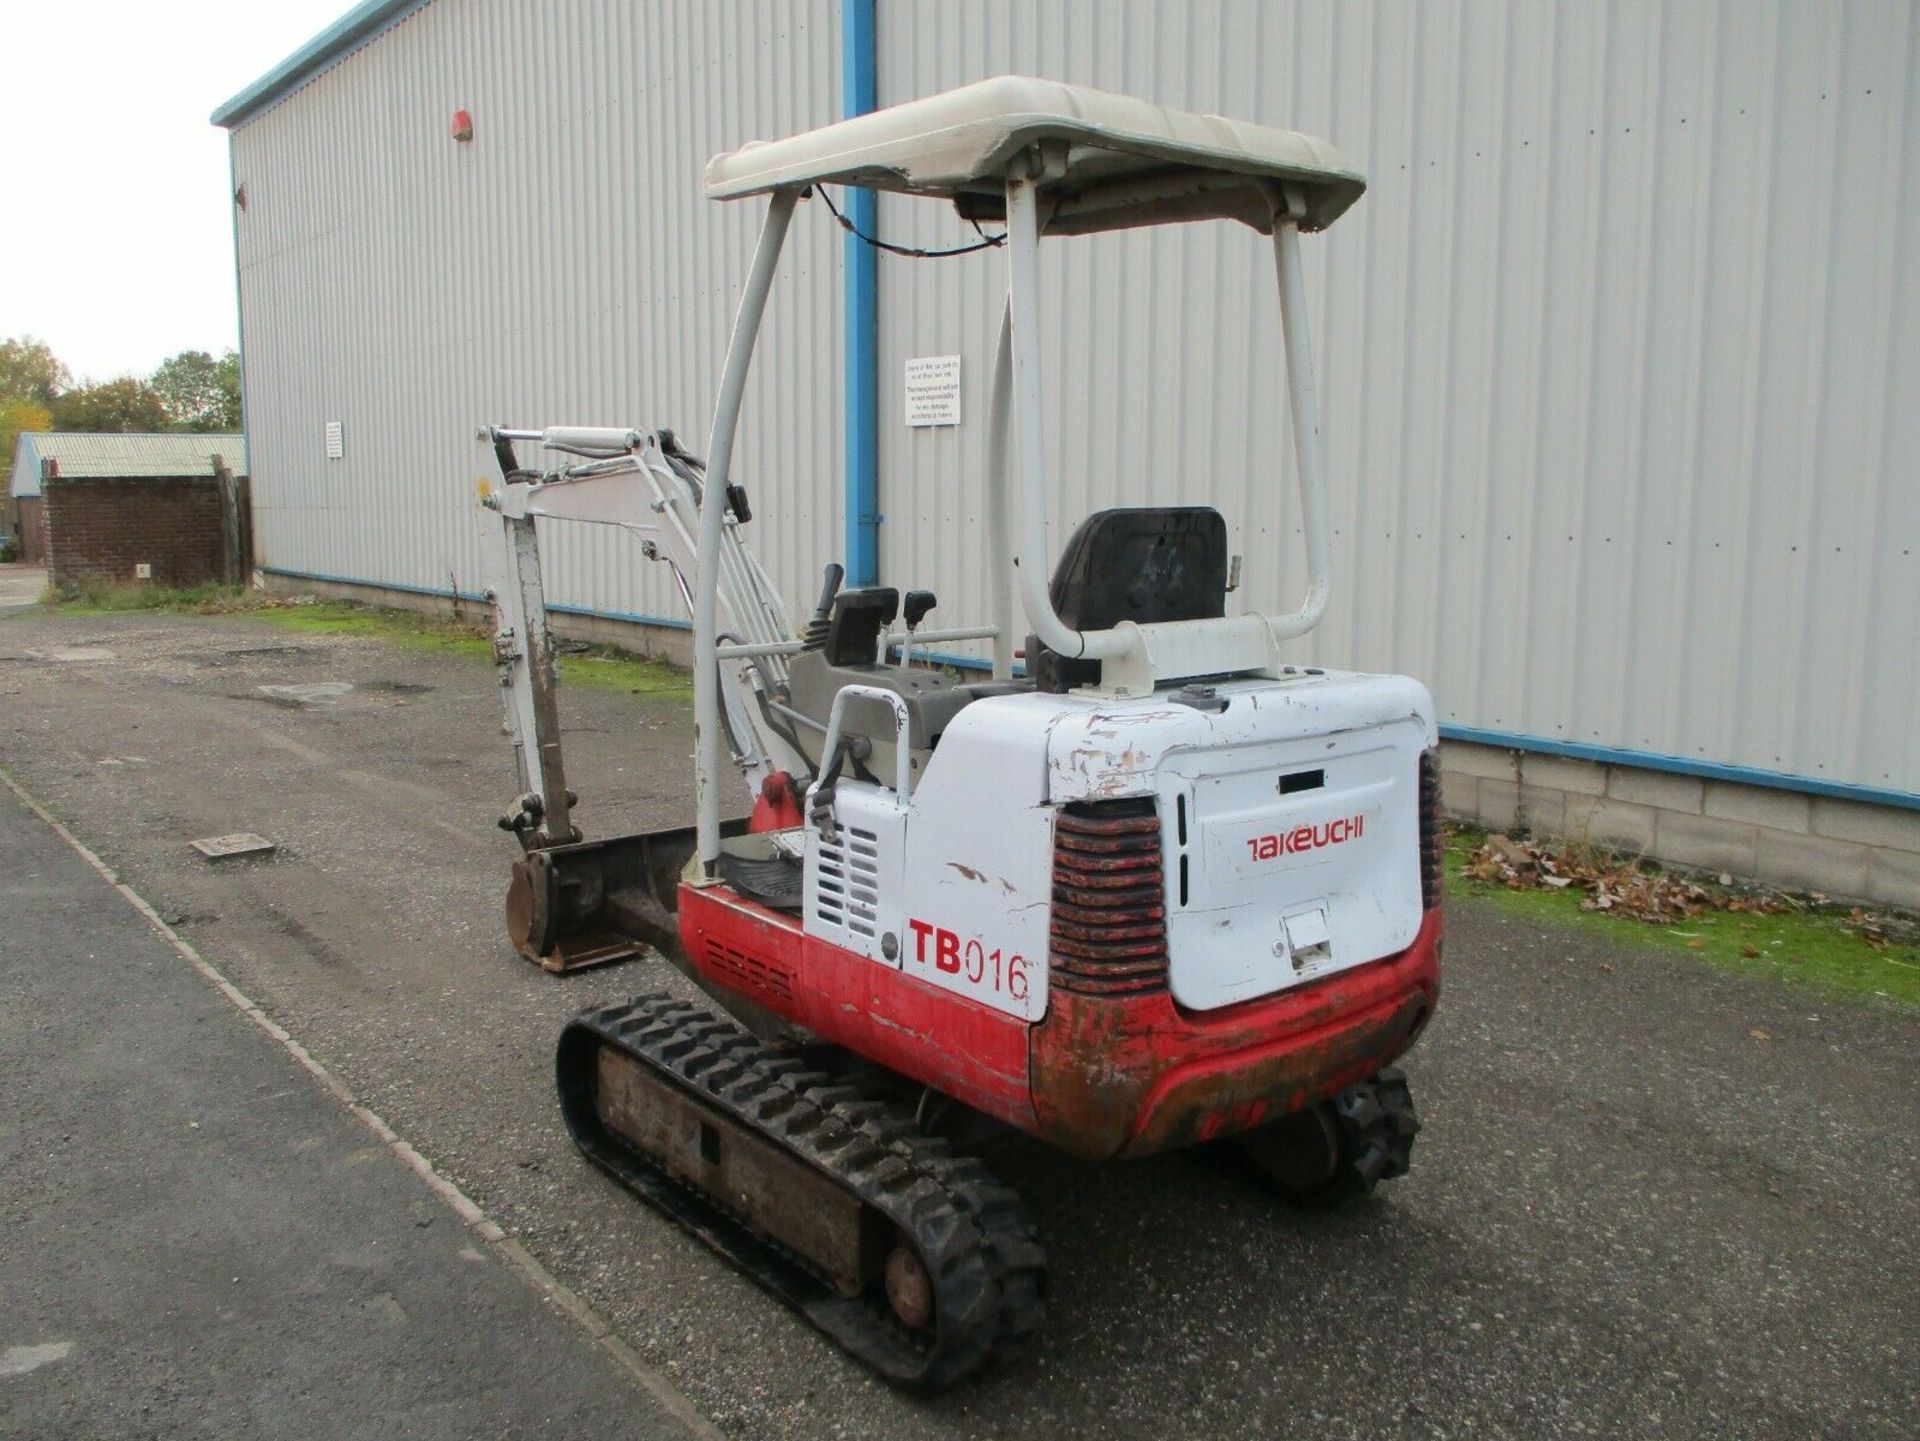 2009 Takeuchi TB016 mini digger excavator expanding tracks delivery arranged - Image 4 of 12